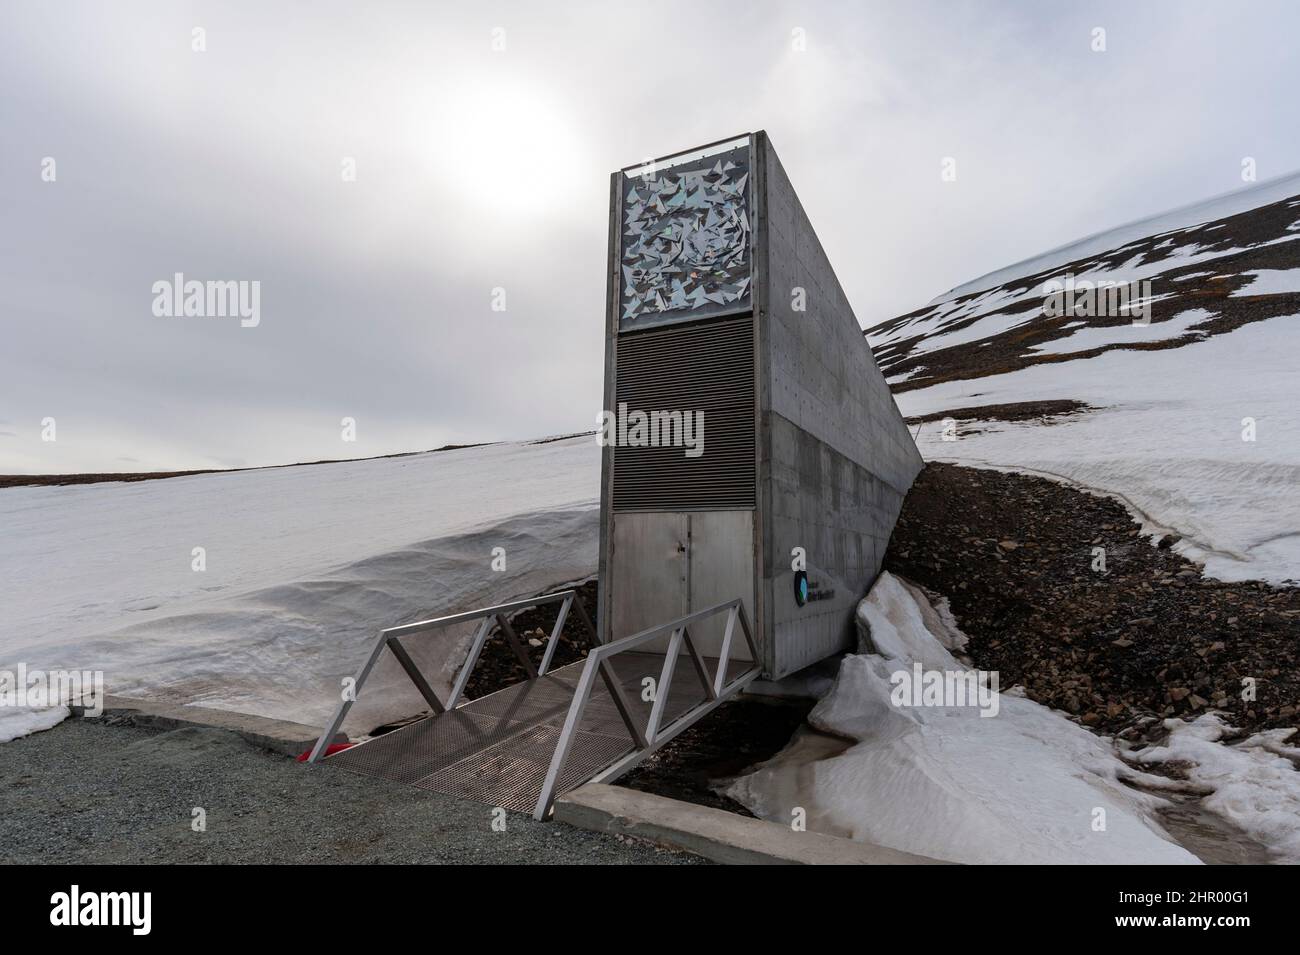 The entrance to the Svalbard Global Seed Vault built into a snow covered mountain. Longyearbyen, Spitsbergen Island, Svalbard, Norway. Stock Photo